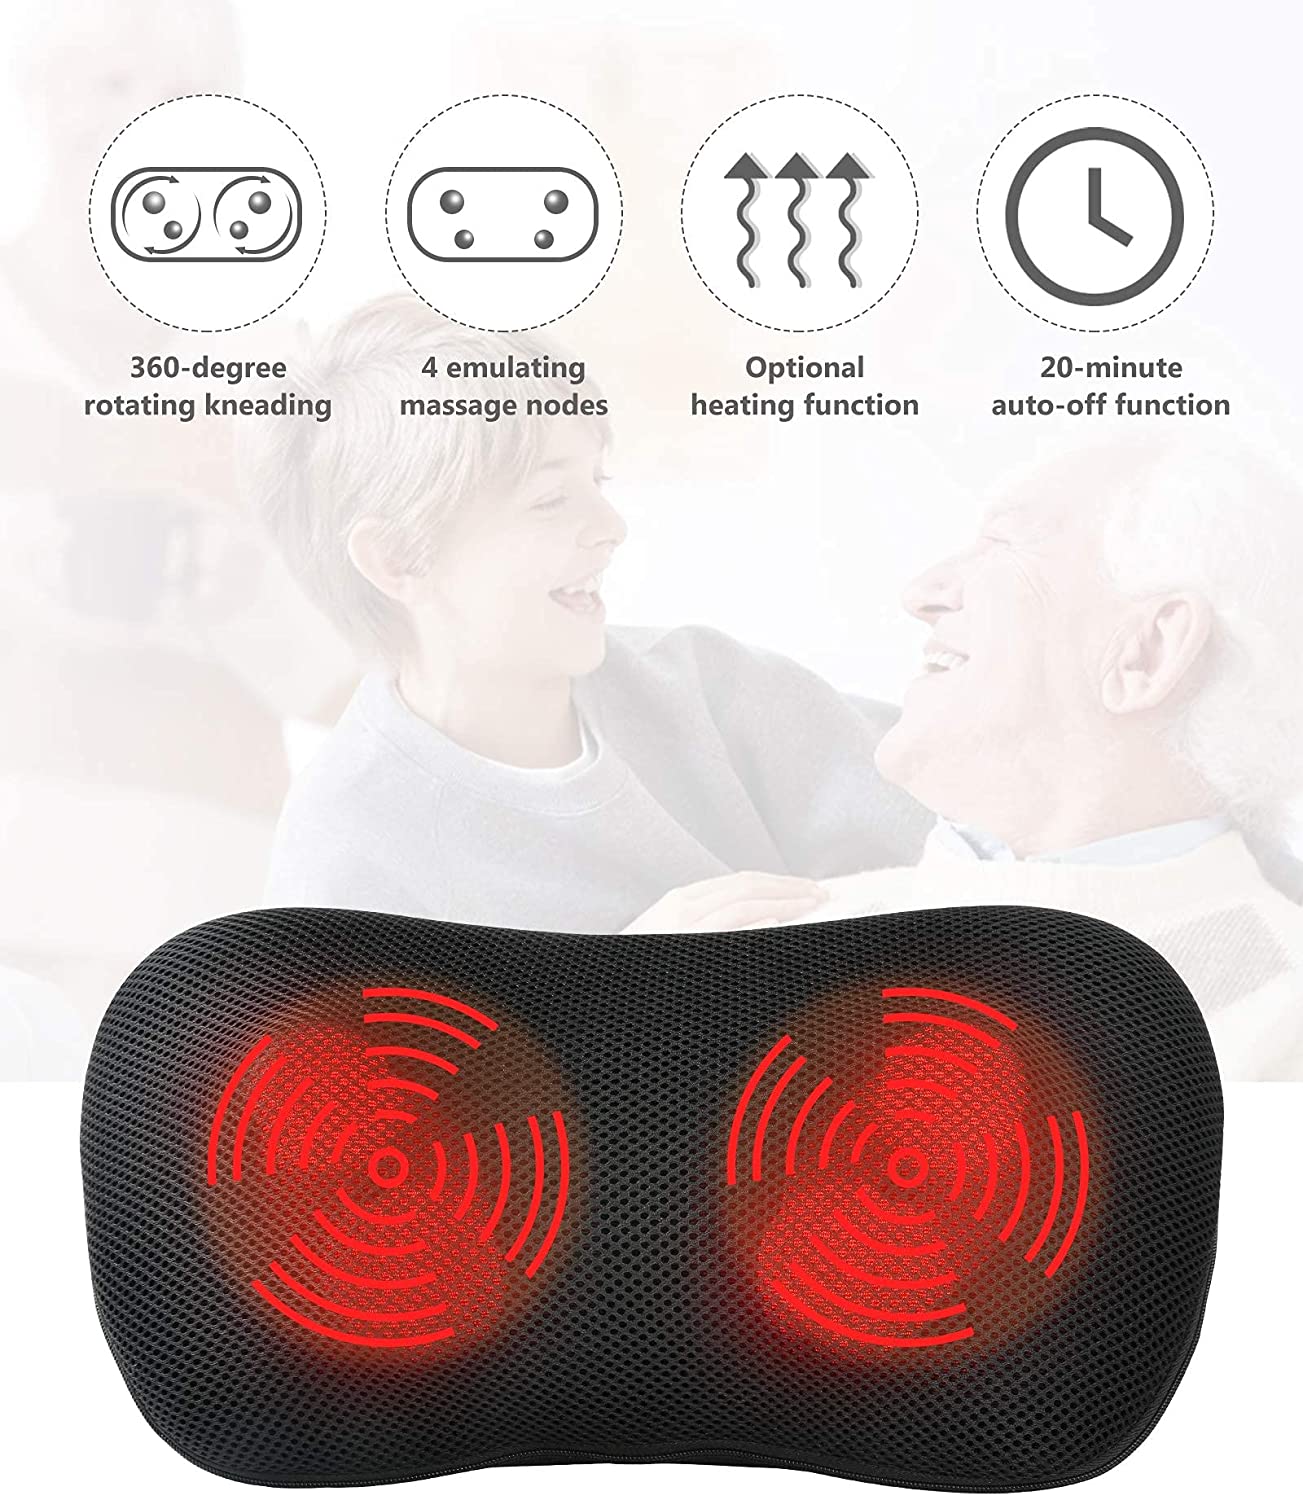 Load image into Gallery viewer, Maxkare Back Massager Neck Massager Massage Pillow With Heat, Shiatsu Kneading Massager for Shoulder, Waist, Use At Home Office - NAIPO
